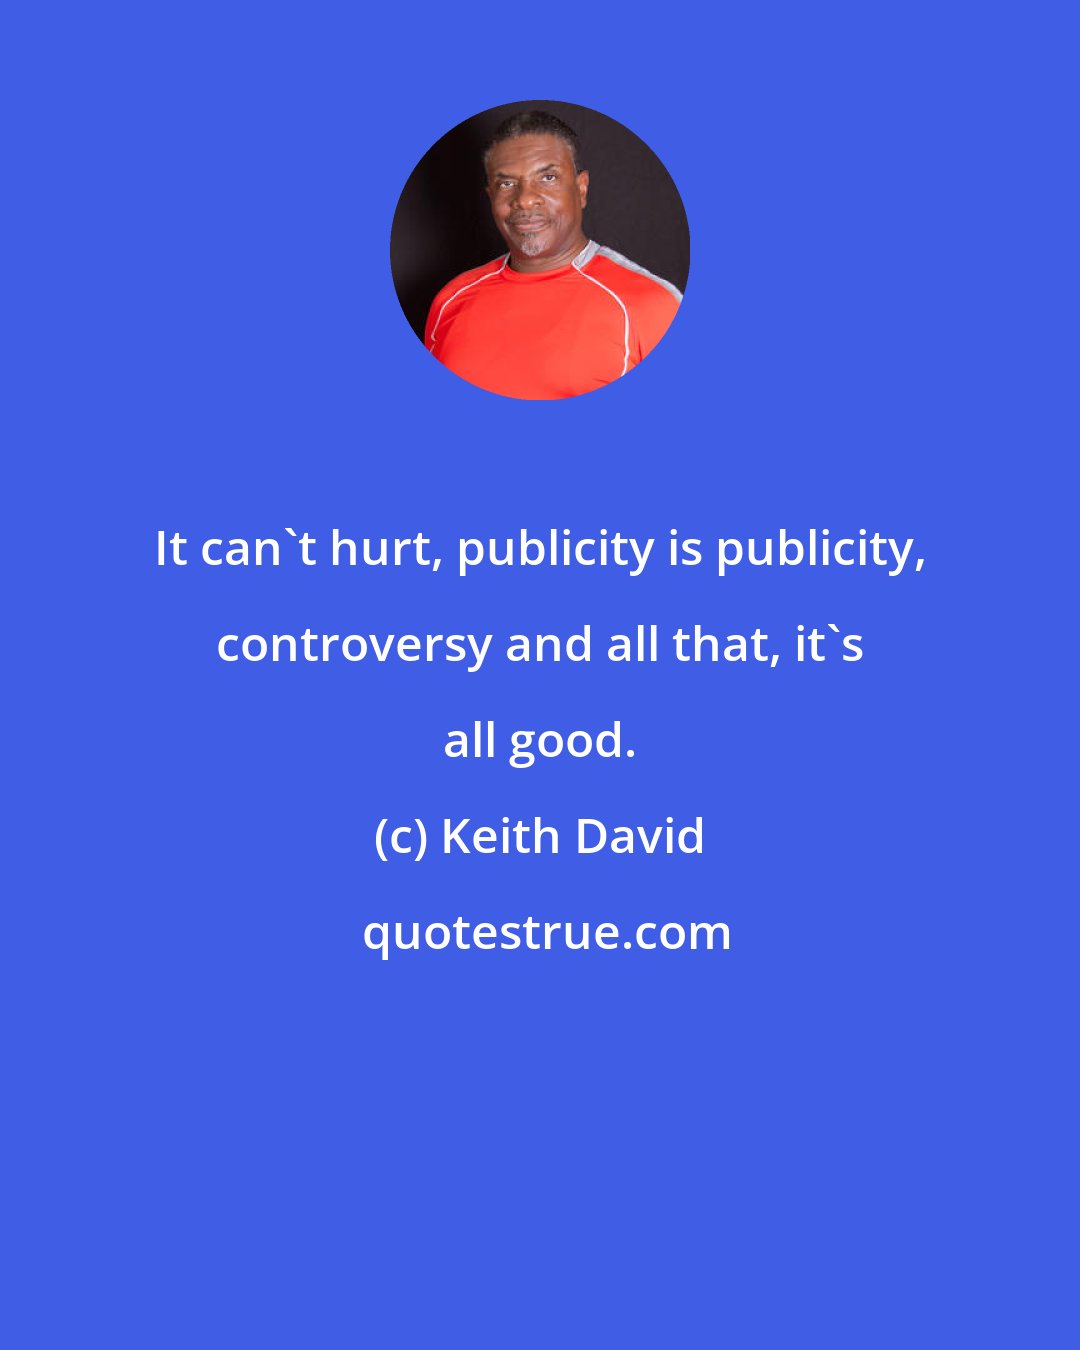 Keith David: It can't hurt, publicity is publicity, controversy and all that, it's all good.